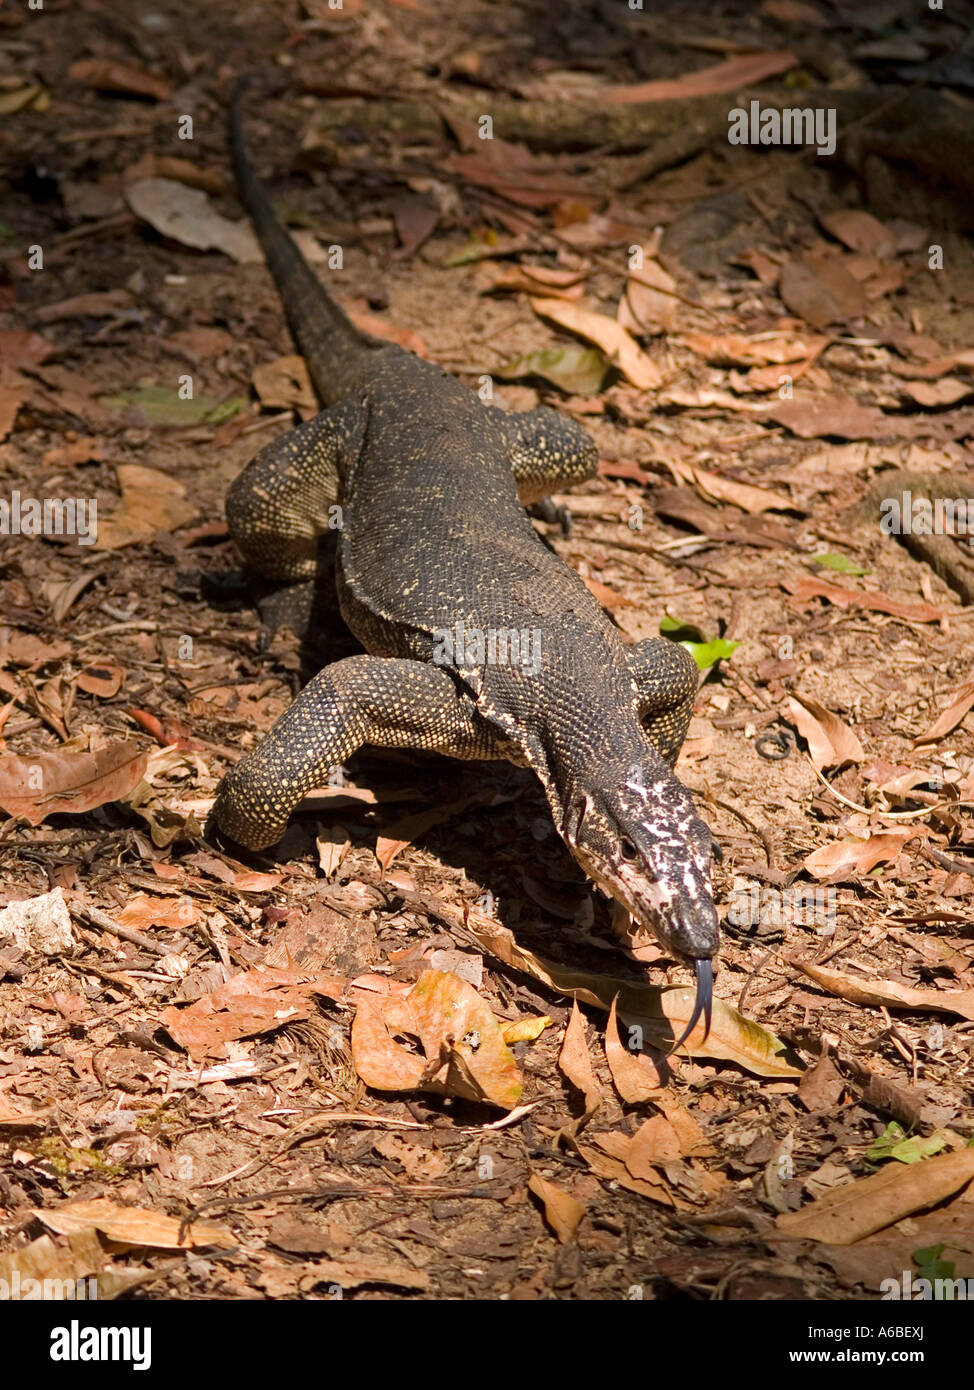 Monitor Lizard Foraging On Forest Floor Palawan Philippines Stock